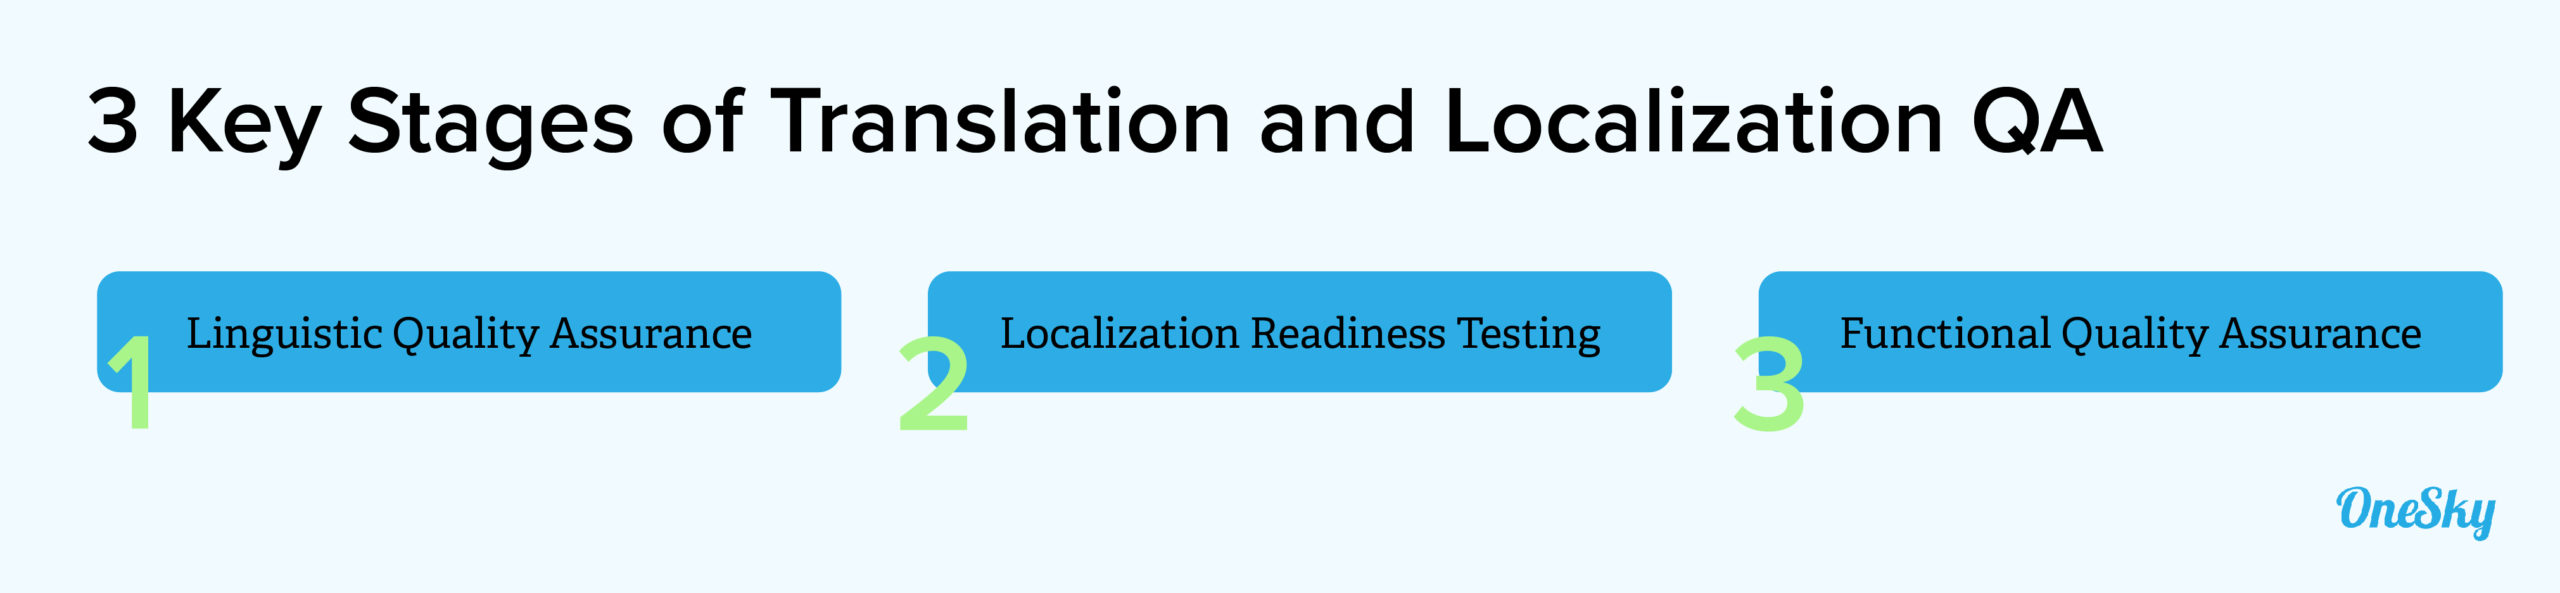 3 Key Stages of Translation and Localization Quality Assurance